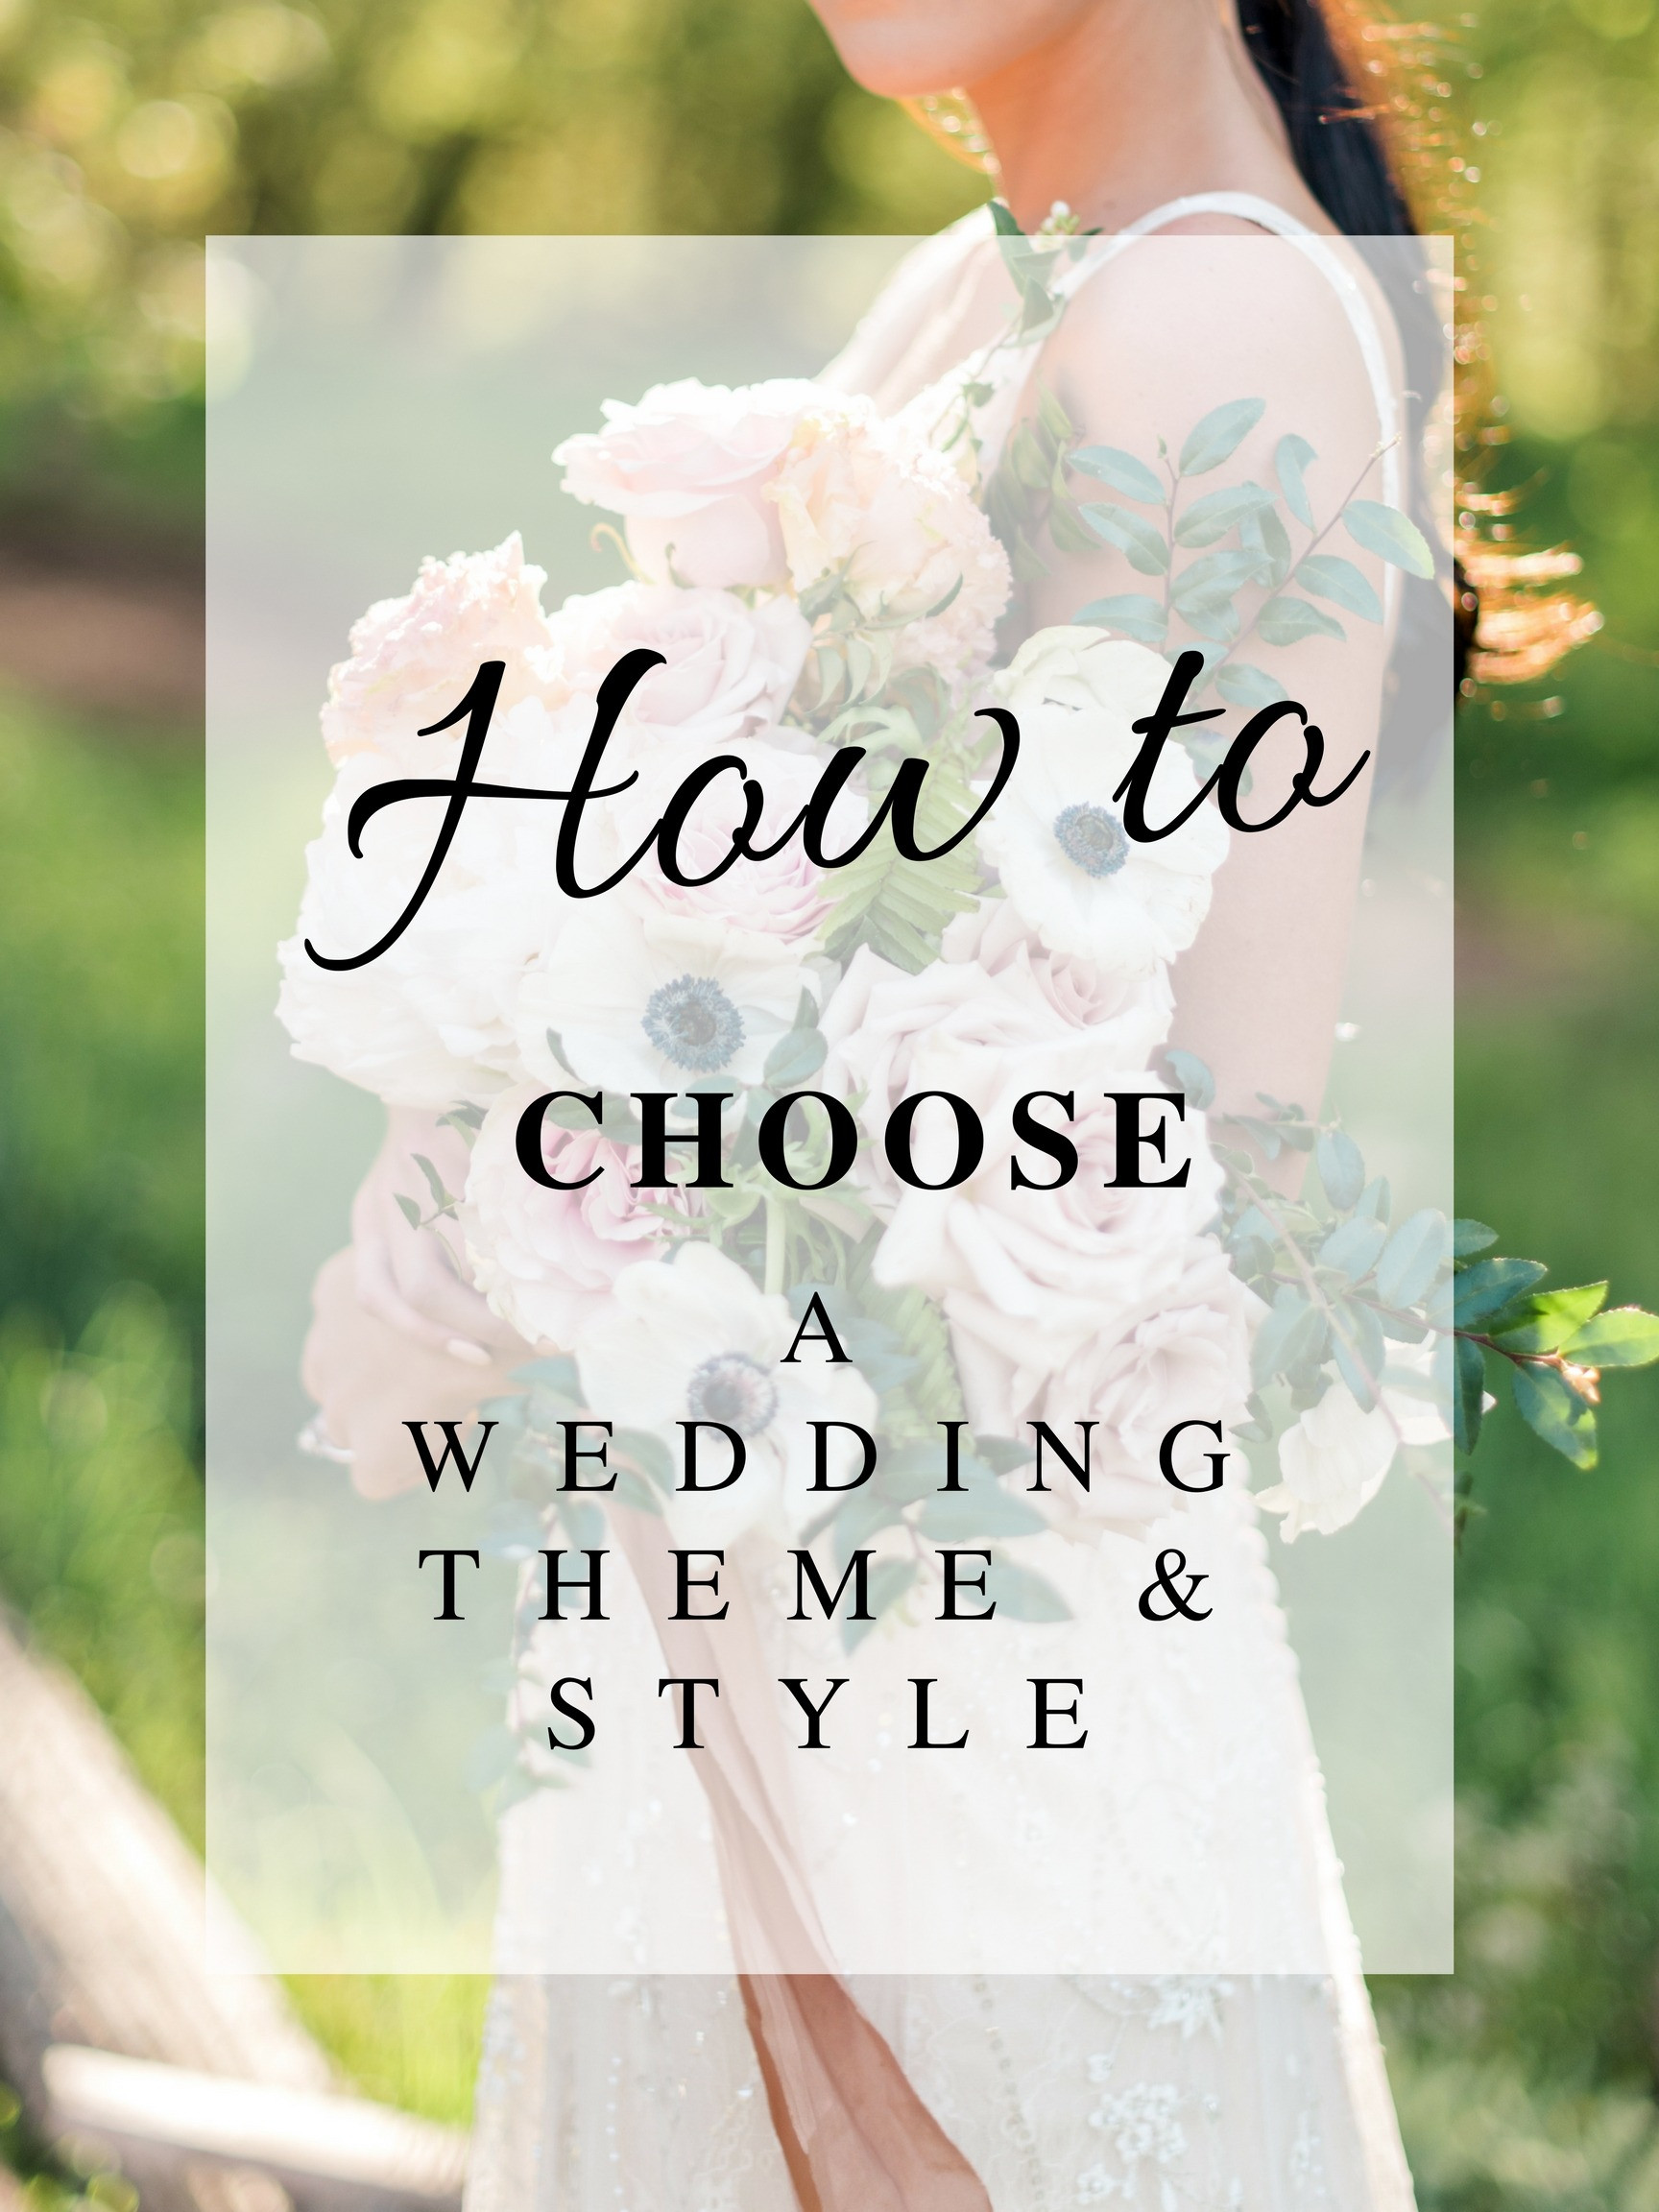 How To Pick A Wedding Theme
 How to Choose Your Wedding Theme & Style